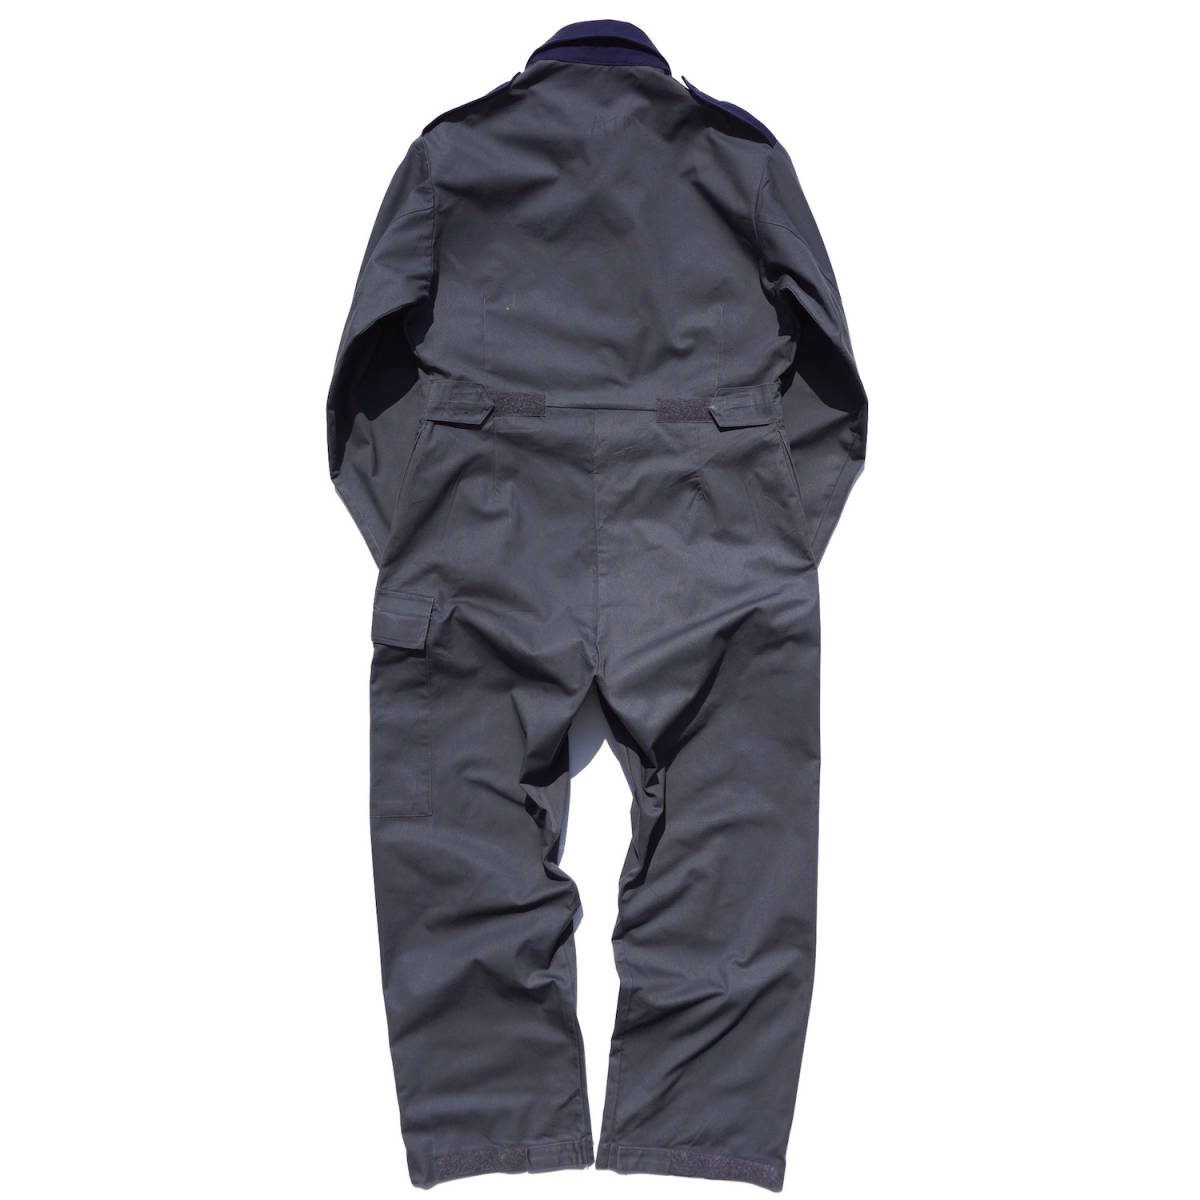 ROYAL AIR FORCE England Air Force the truth thing coverall Jump suit 170/100 gray Target Mark UKmoz all-in-one coveralls old clothes 